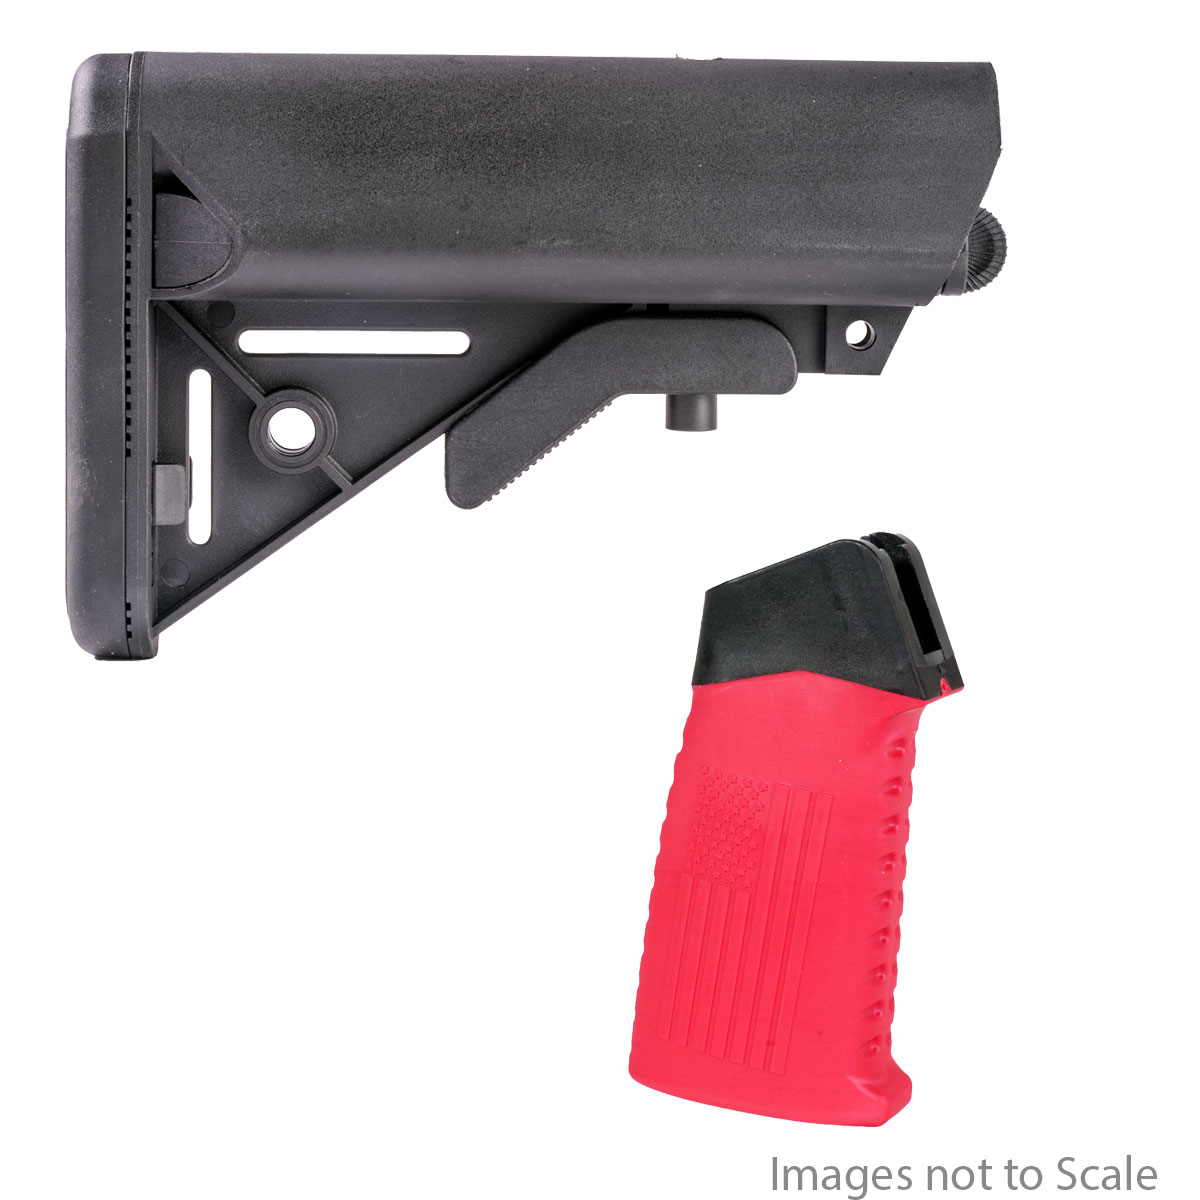 Furniture Upgrade Kit: Team Accessories Corp AR15 Grip Window Grip Straight Top Flag/Ribbed Red  + Gauntlet Arms SOPMOD Style Collapsible Stock with Storage Compartments